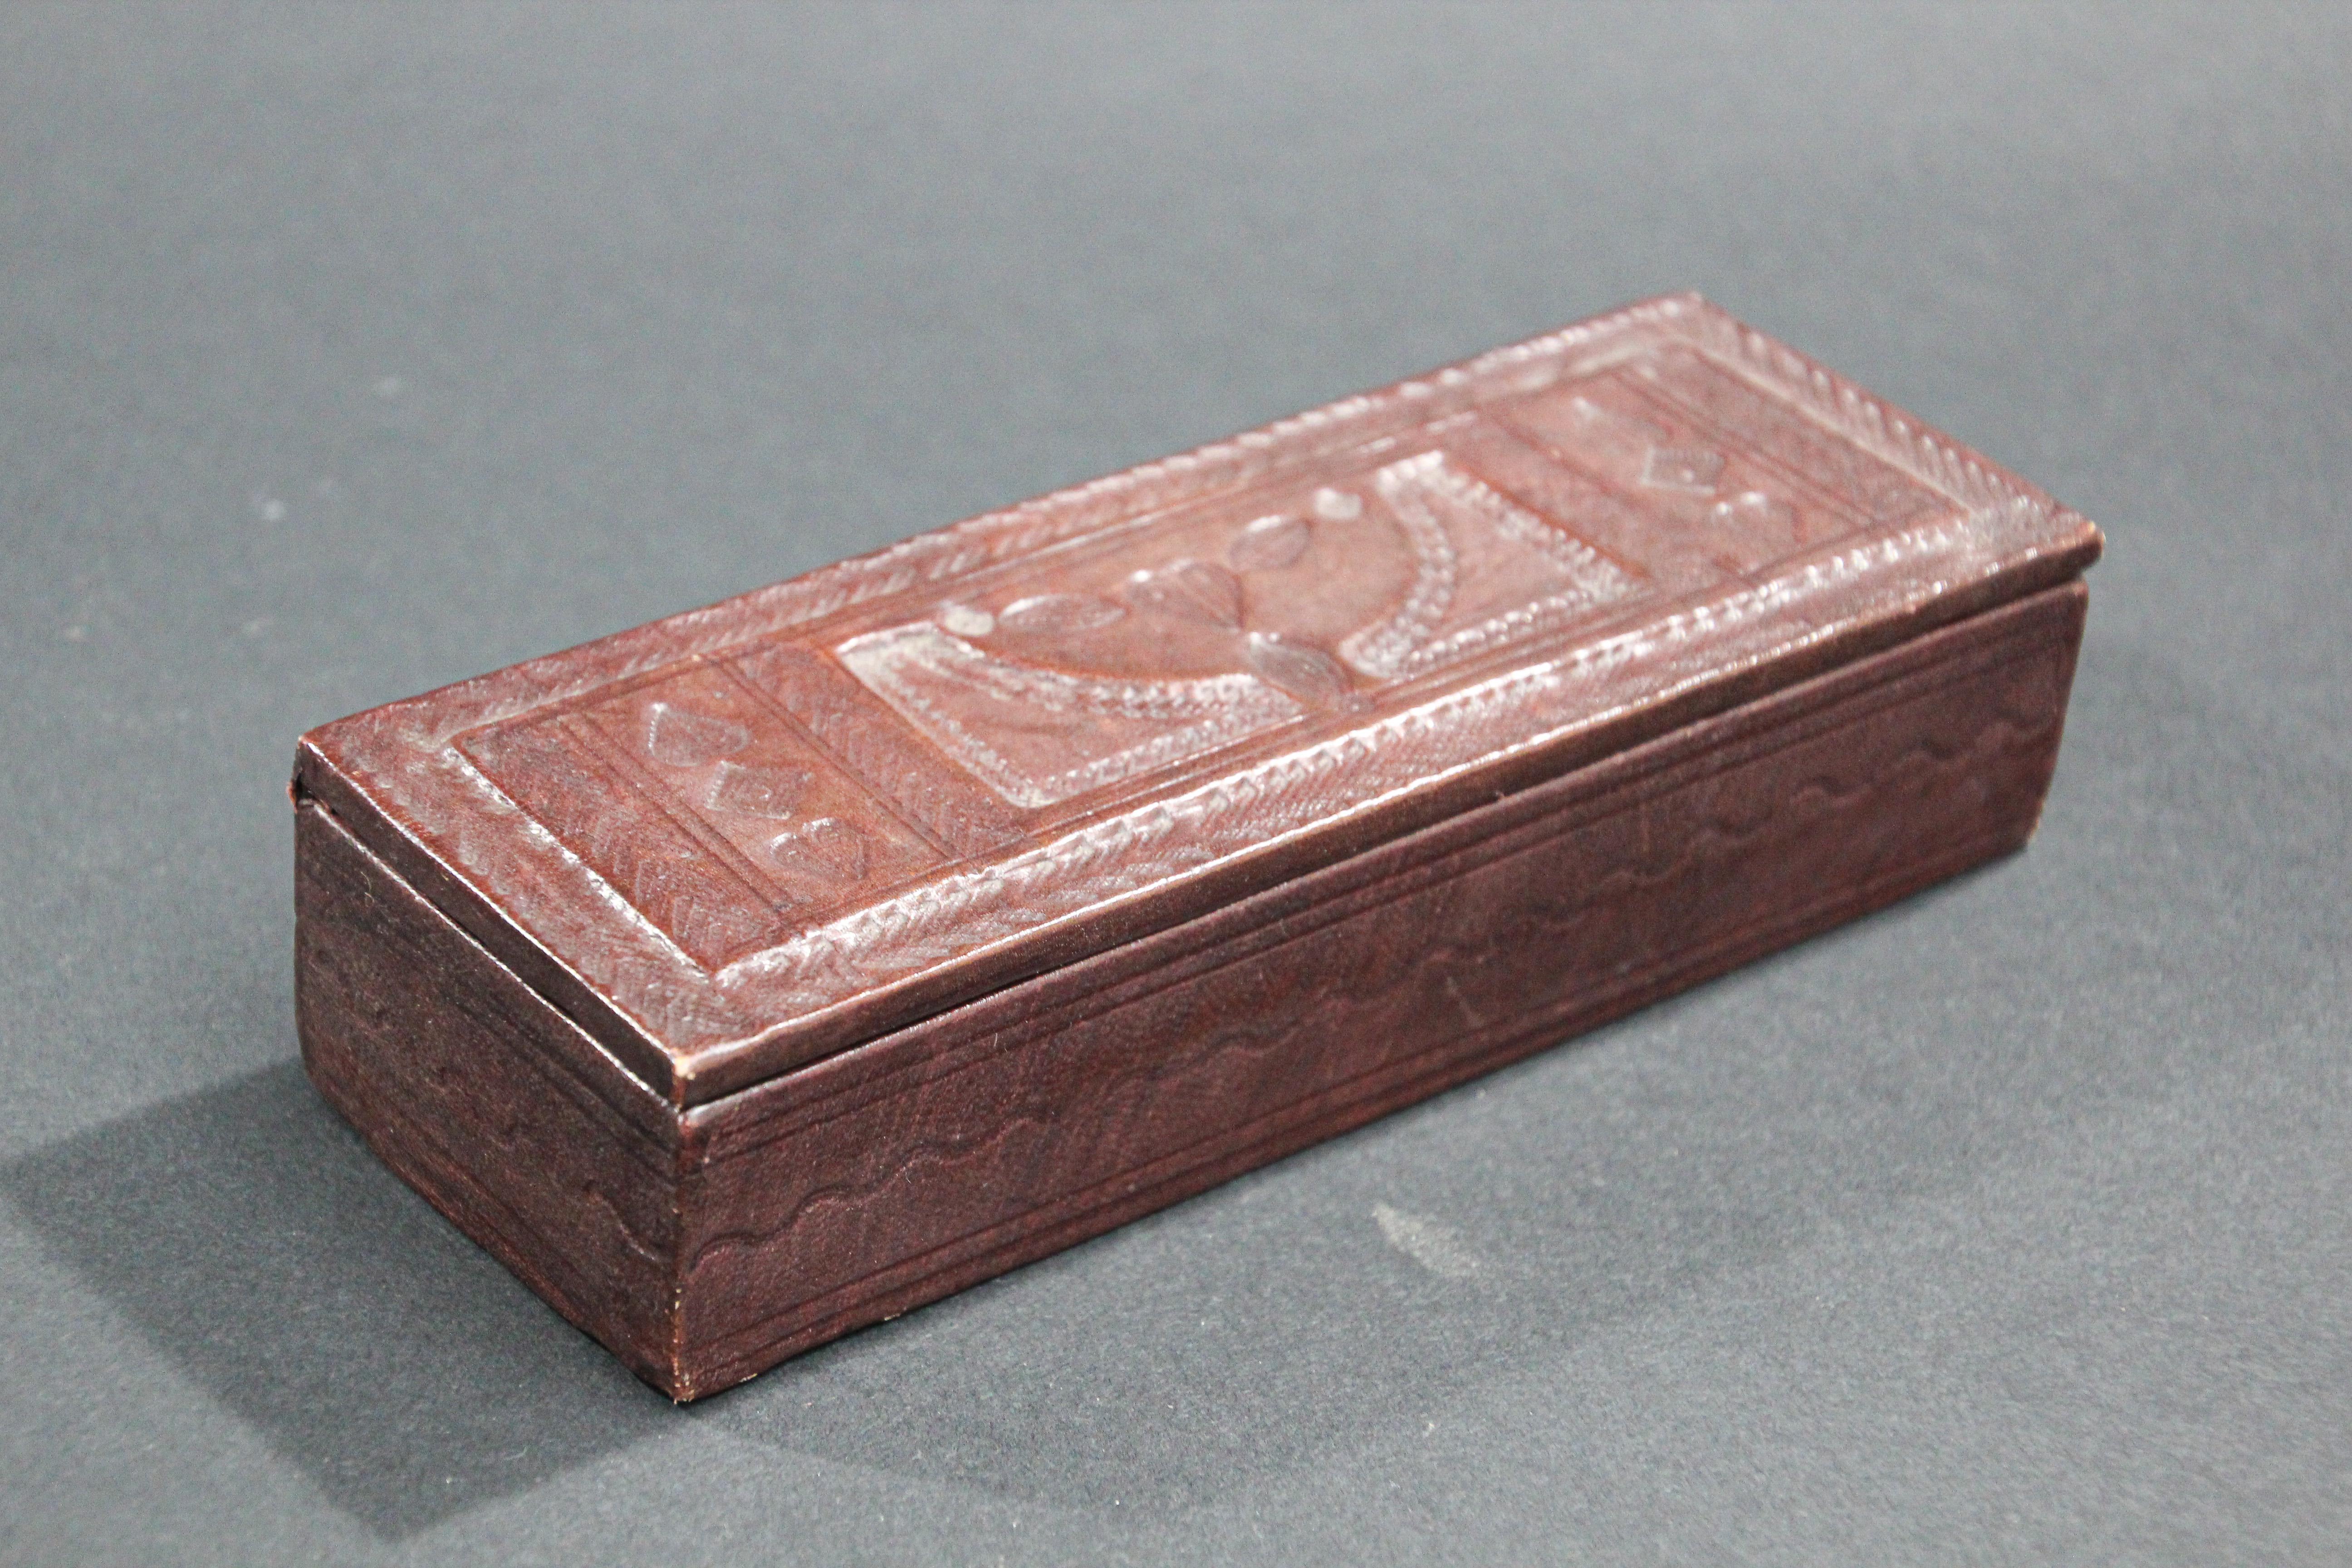 Hand tooled brown leather box from Africa.
Very fine workmanship with tribal traditional West African symbols on leather.
Tuareg style probably Mauritania.
Open to a leather lined interior.
Dimensions: 7.5